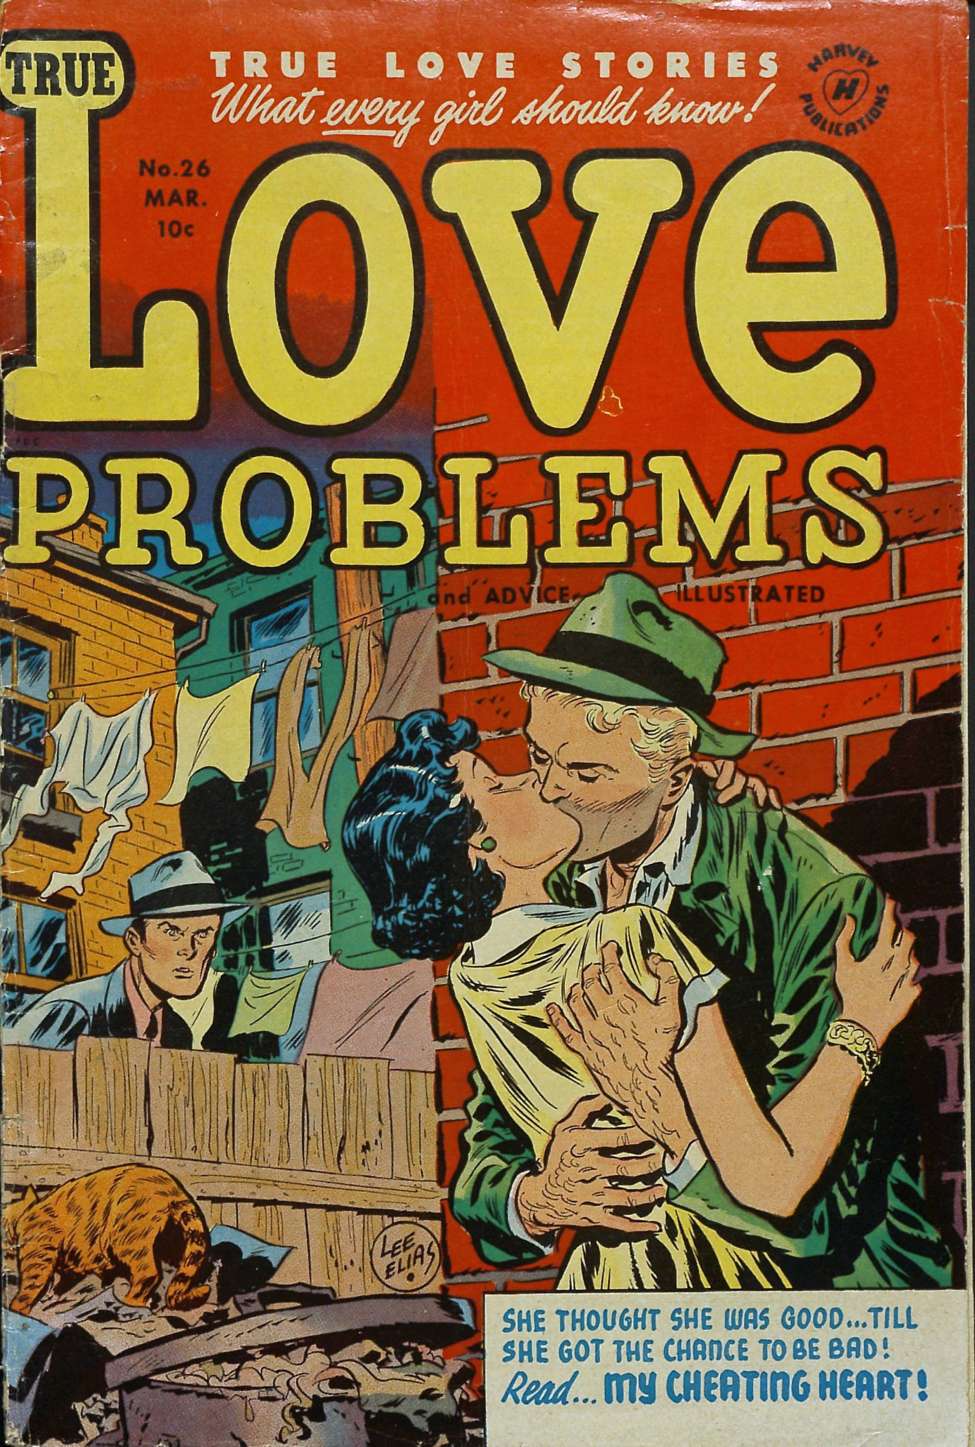 Comic Book Cover For True Love Problems and Advice Illustrated 26